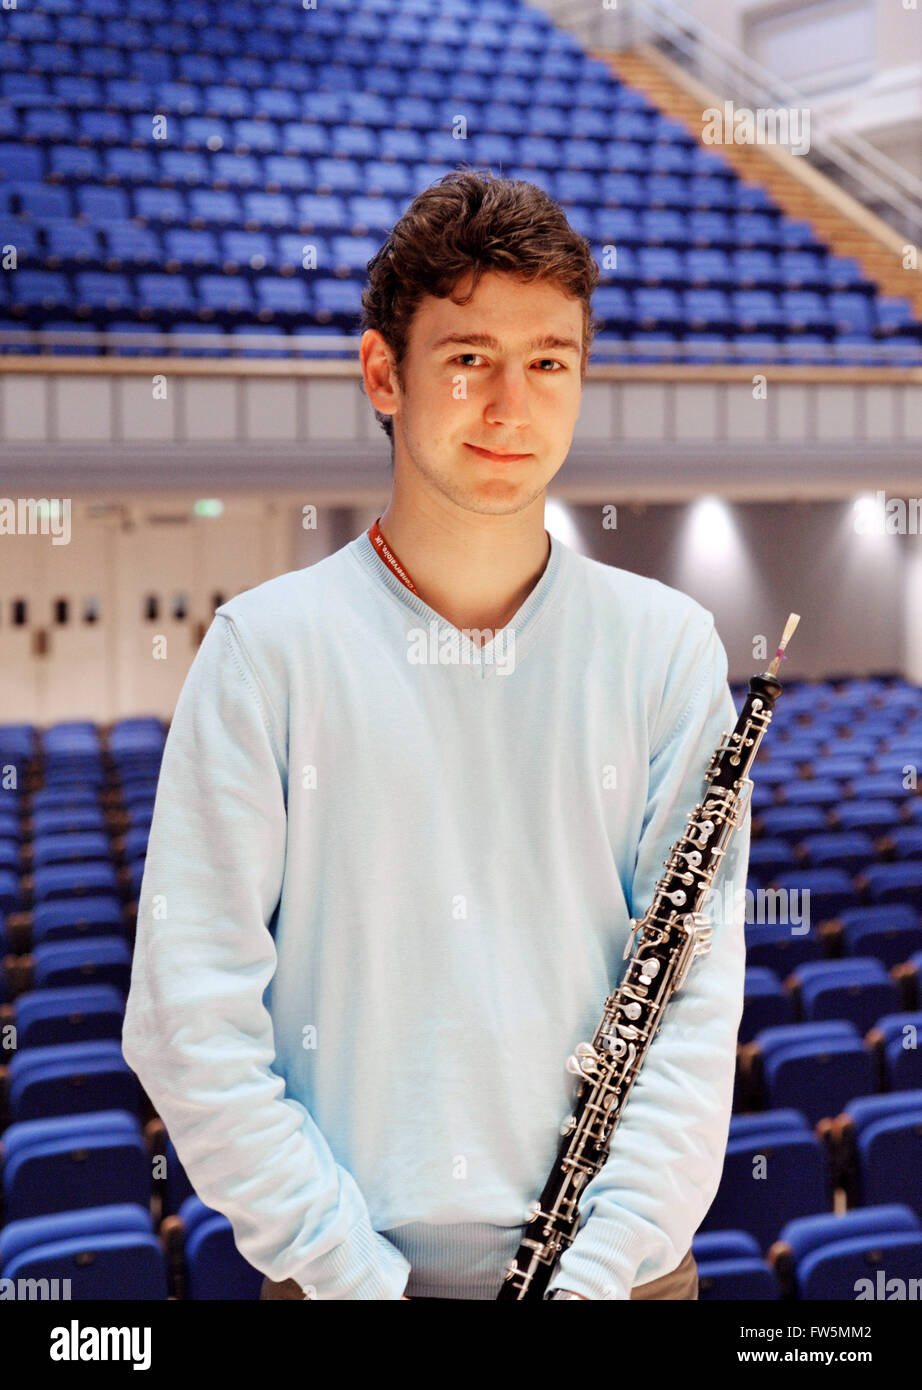 oboist Phillipe Tondre, First Prize winner of the IDRS Fernand Gillet Competition, Birmingham Town Hall, June 2010. Born in 1989, Philippe Tondre joined the class of David Walter and Jacques Tys at the Conservatoire National Supérieur de Musique de Paris in 2006. Since October 2008 he has been principal oboe of the Radio Sinfonie Orchester Stuttgart des WER. Winner of Third Prize and Special Prize of the International Competition of the Prague Spring in 2008, 3rd prize, Geneva 2010, the Second Prize at the International Competition of Karuizawa sponsored by the Sony Music Foundation in 2009 . Stock Photo